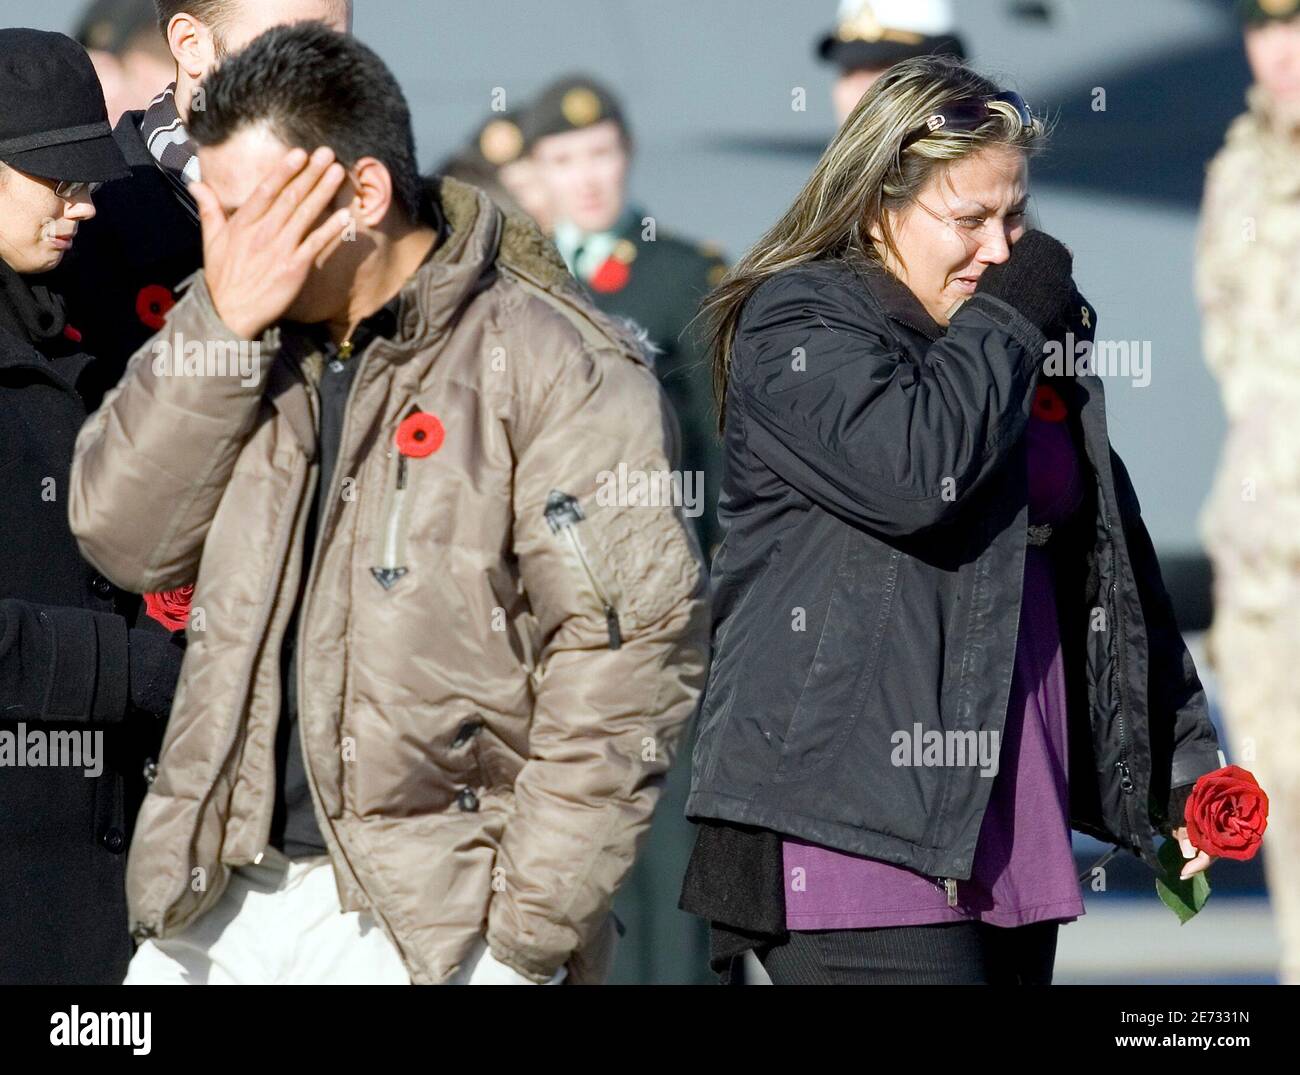 Darlene Thomas (R), the sister of Sapper Steven Marshall, grieves after  placing flowers on his casket at the Canadian Forces Base Trenton, November  3, 2009. Sapper Marshall was killed October 30, 2009